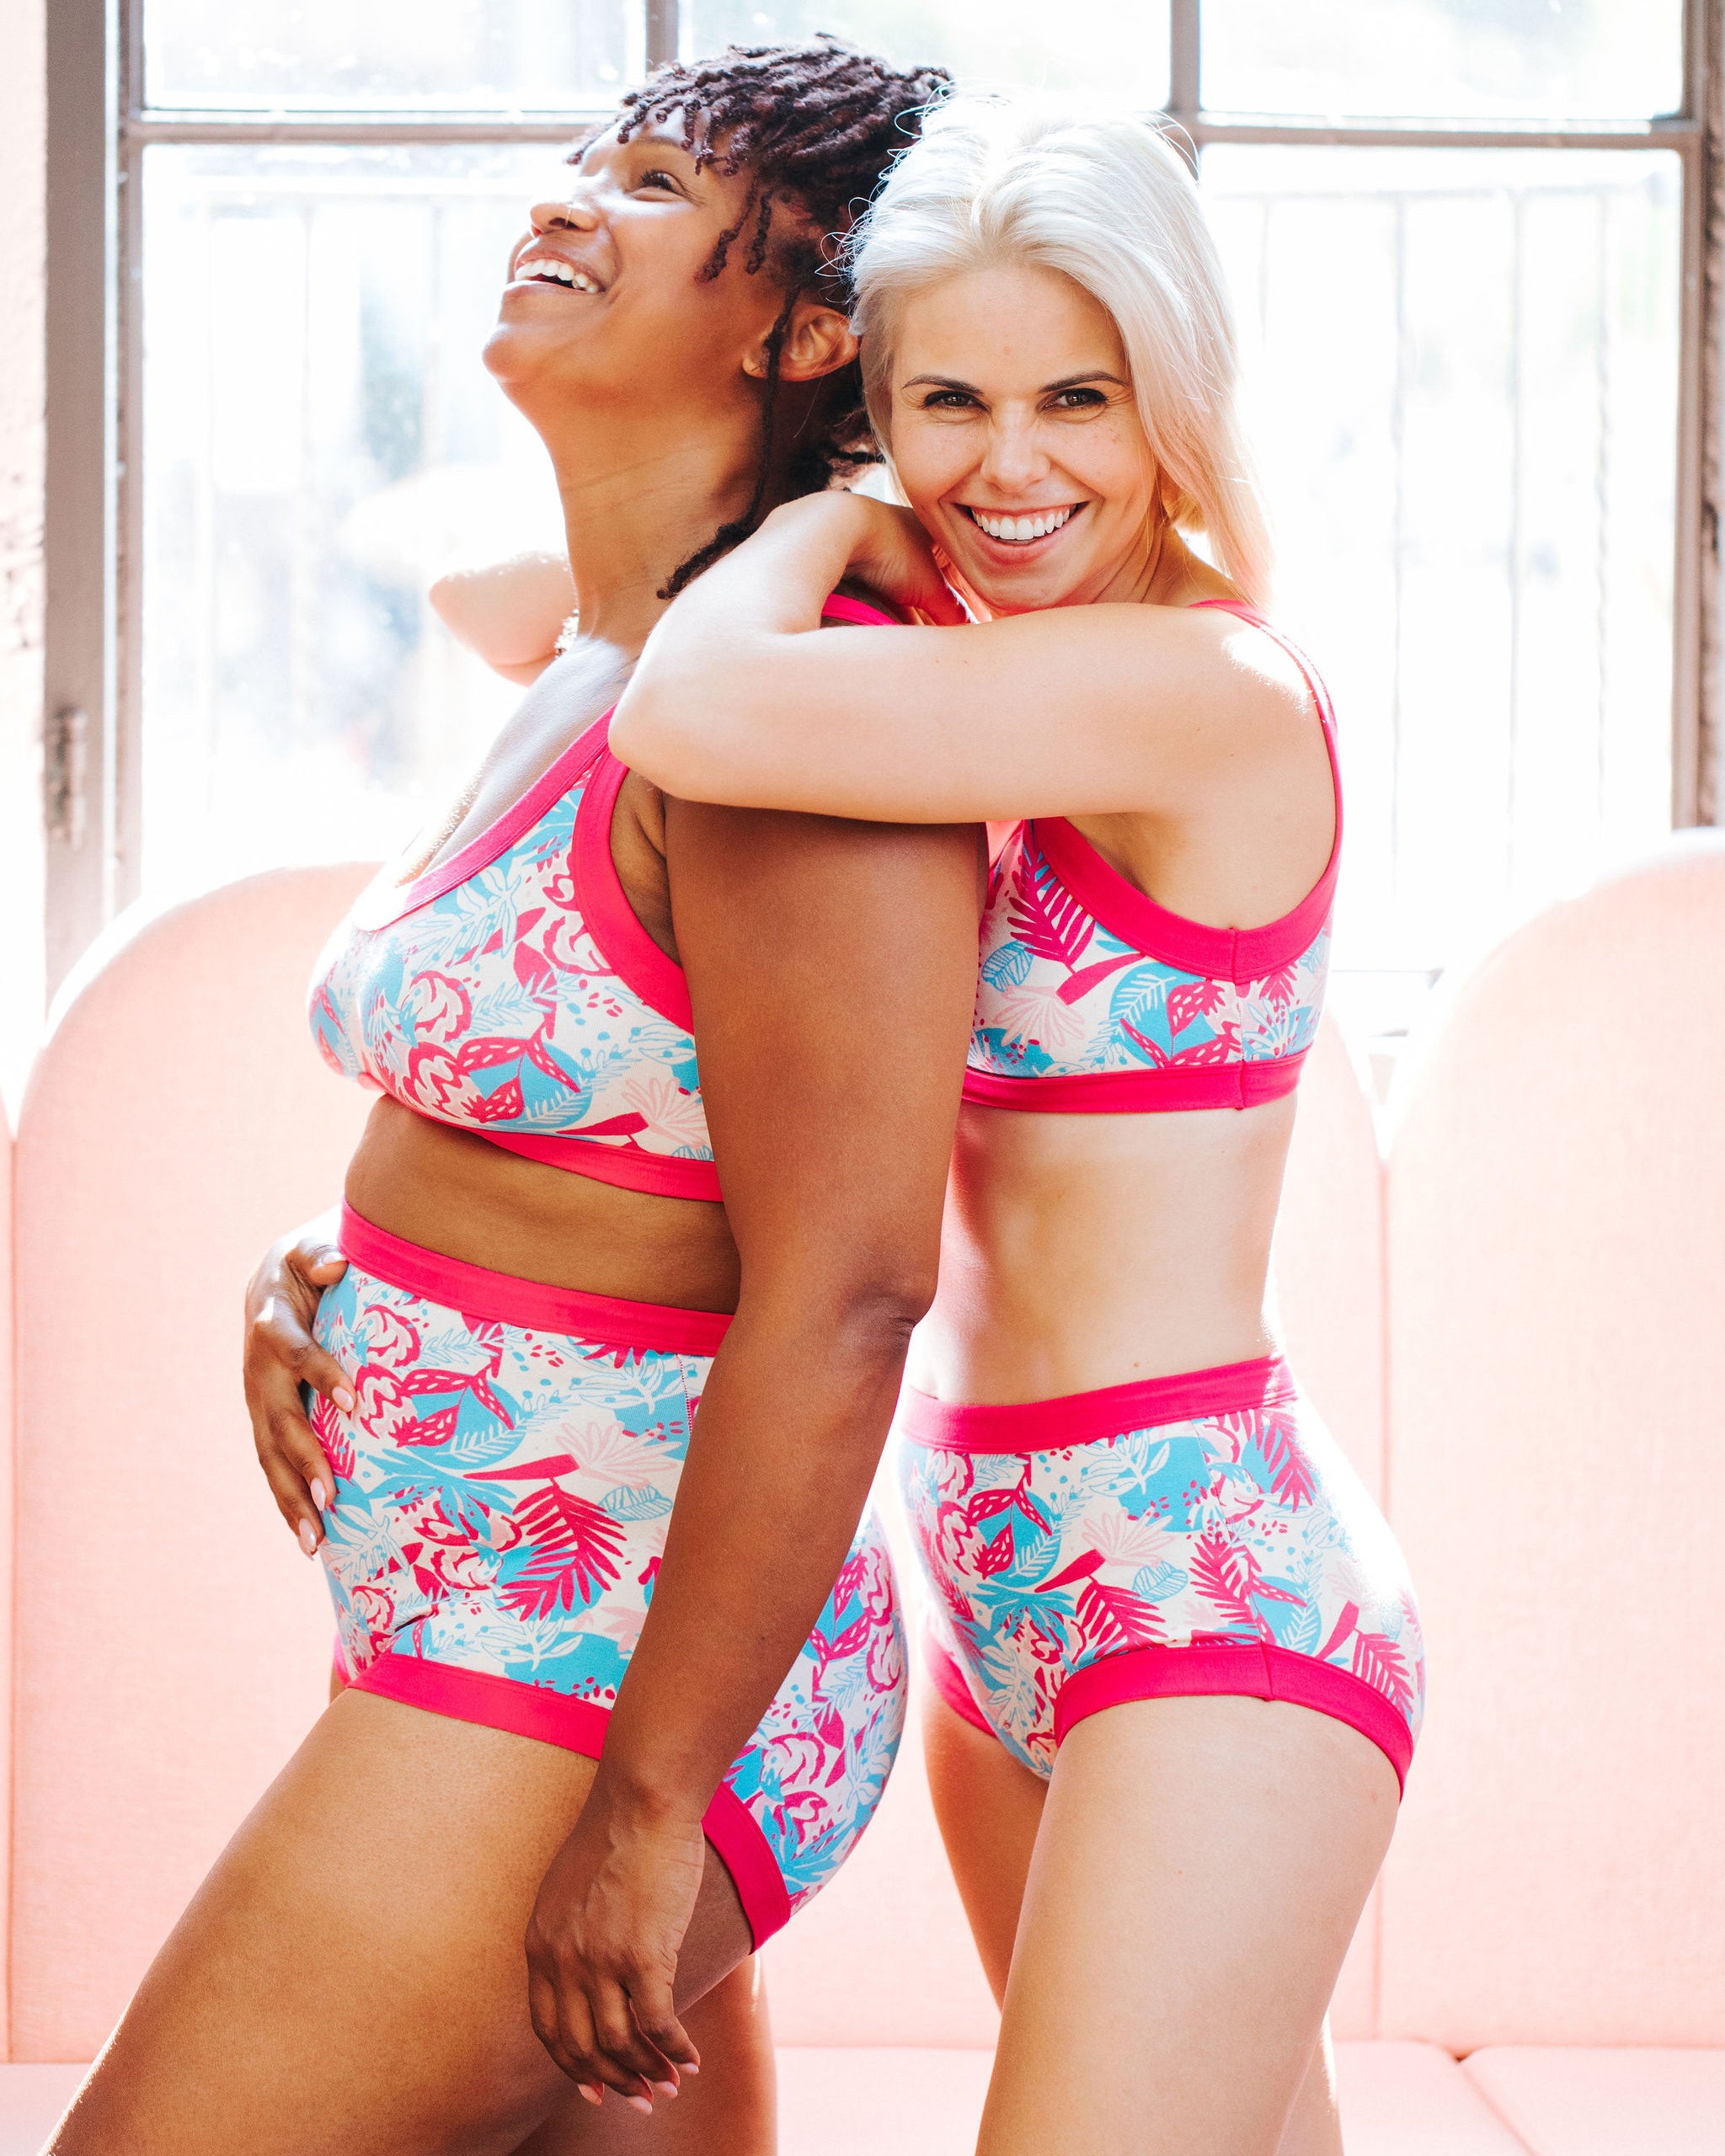 Two models laughing together wearing sets of Thunderpants Original and Sky Rise style underwear and Bralettes in Finding Flamingos - blue and pink Miami-style print.